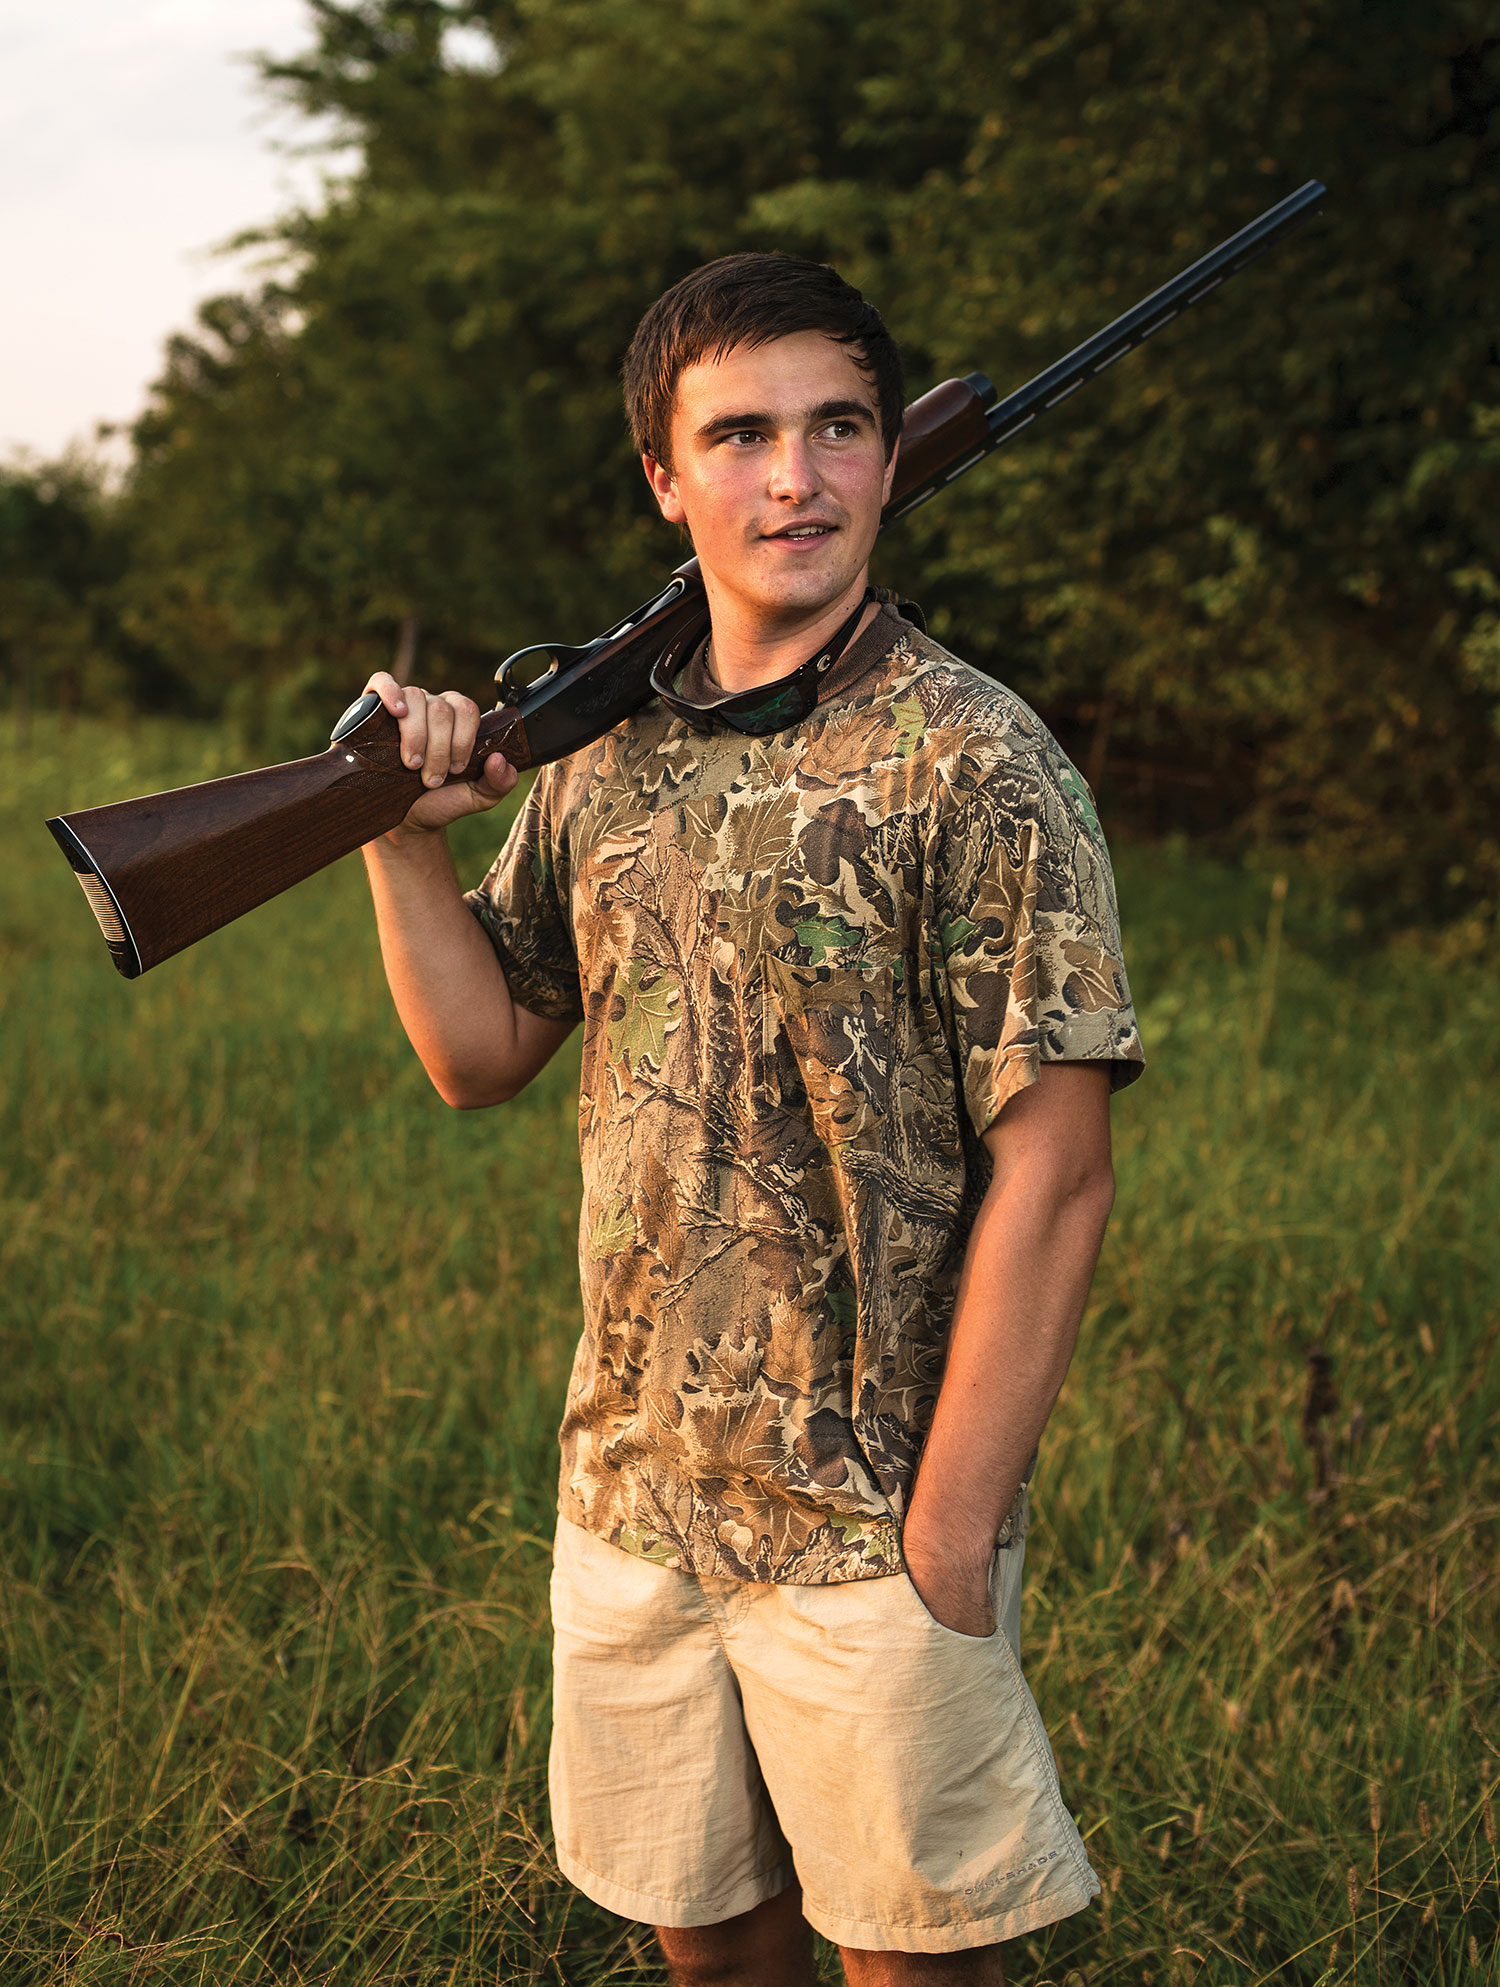 Young dove hunter in camo t-shirt stands in meadow with gun over his shoulder.